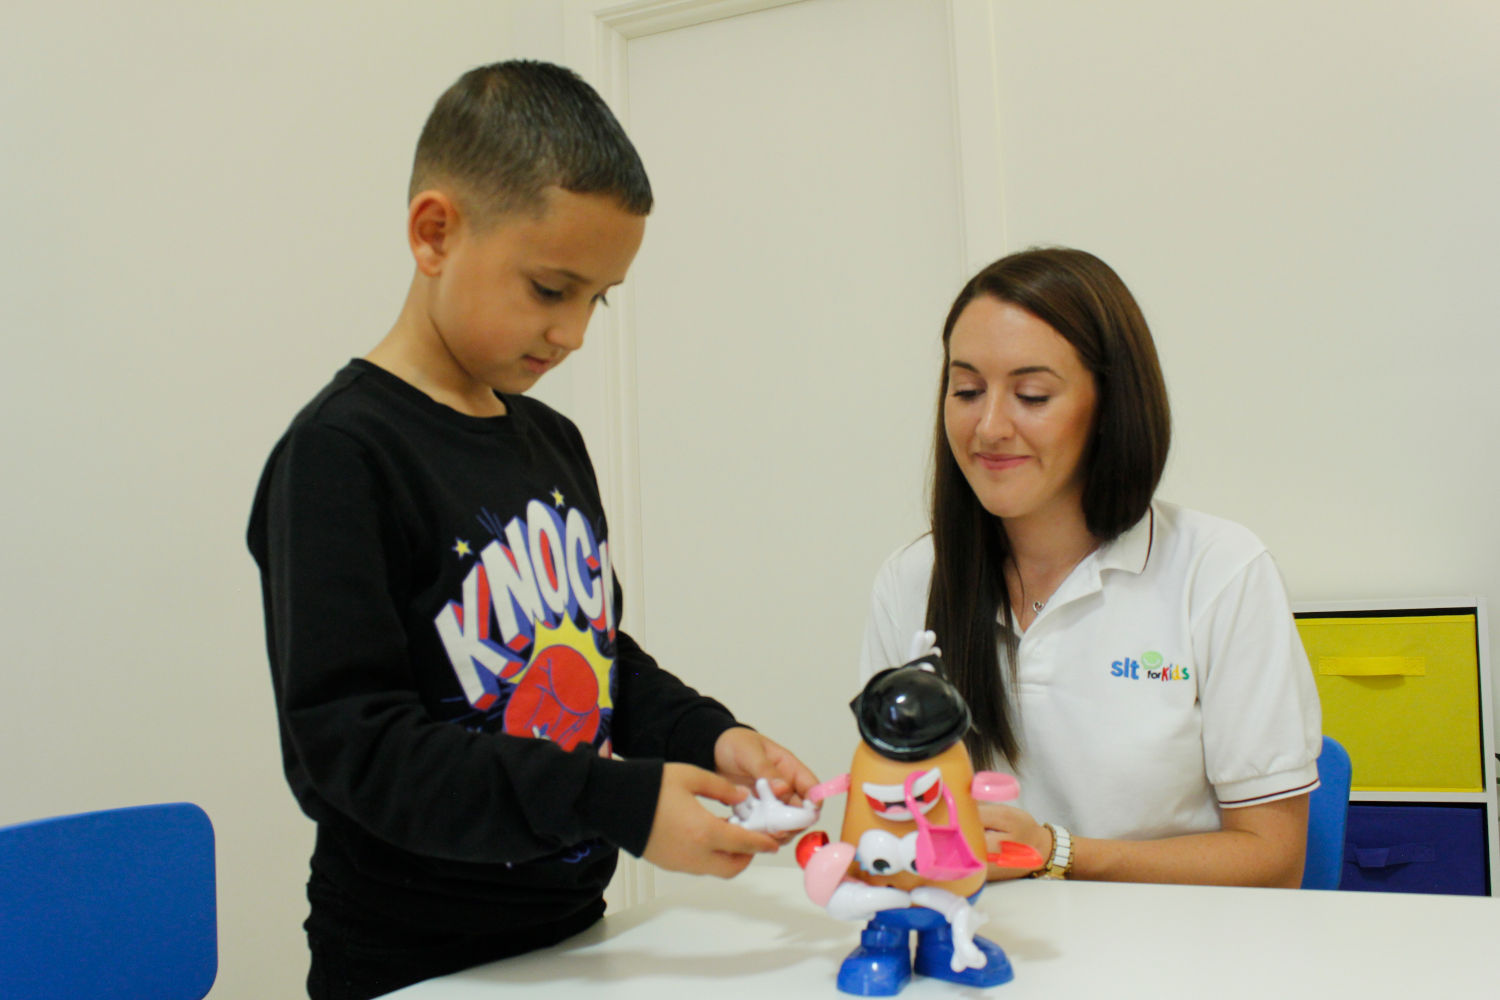 SLT for Kids therapist observing boy play with Mr. Potato Head.